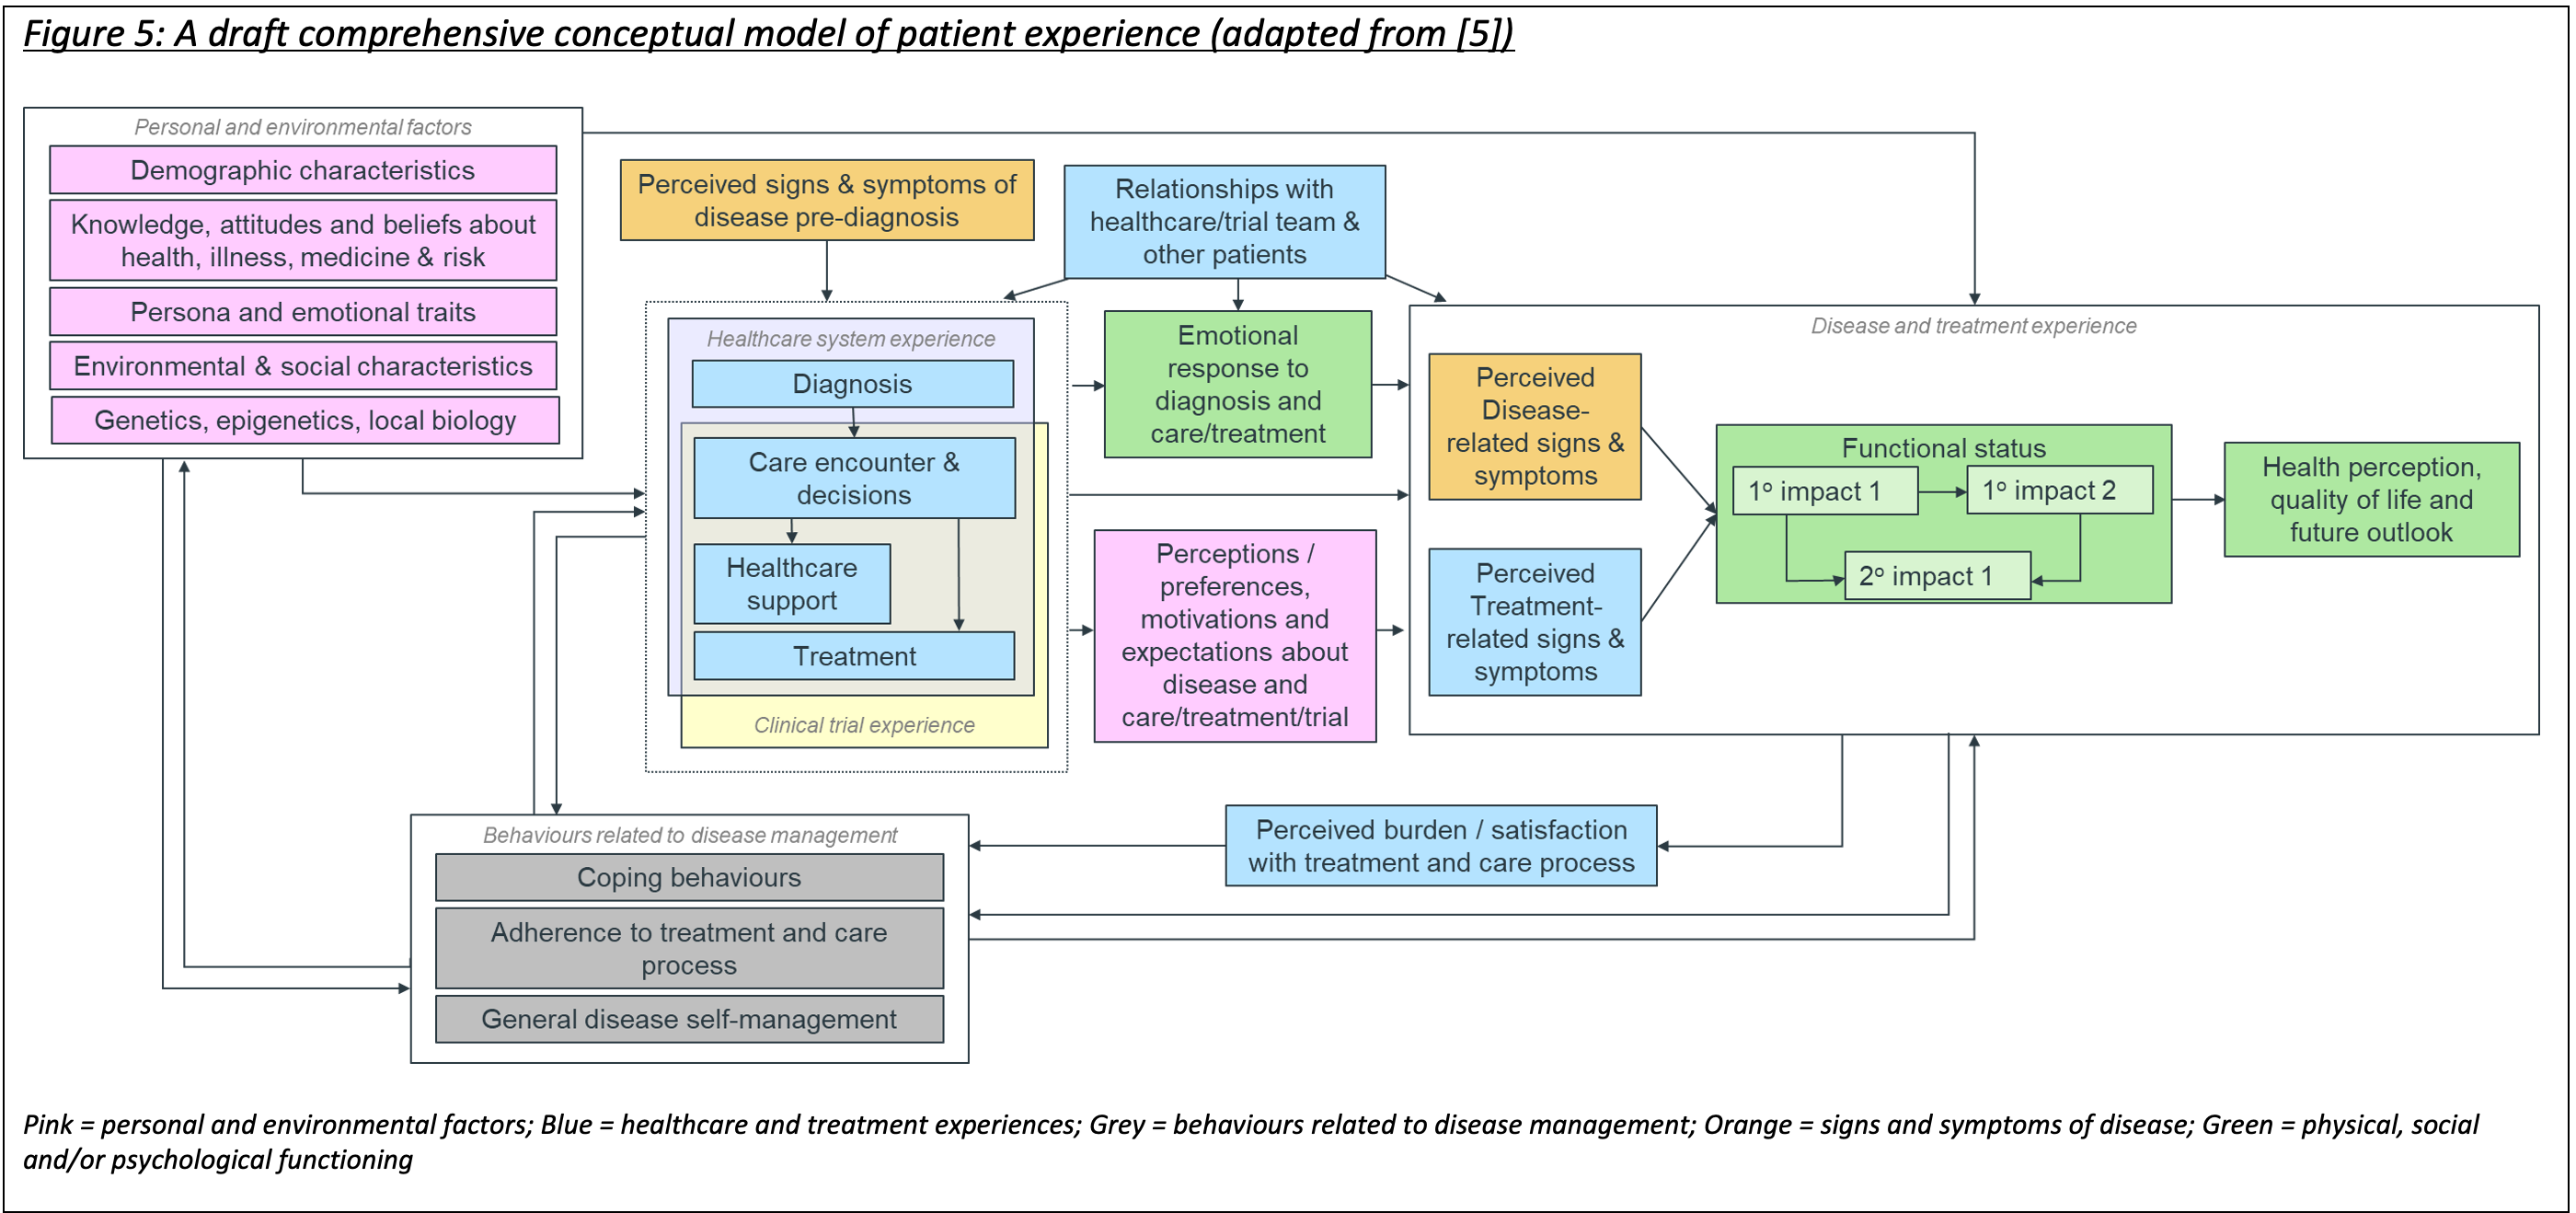 Figure 5: A draft comprehensive conceptual model of patient experience (adapted from [5])